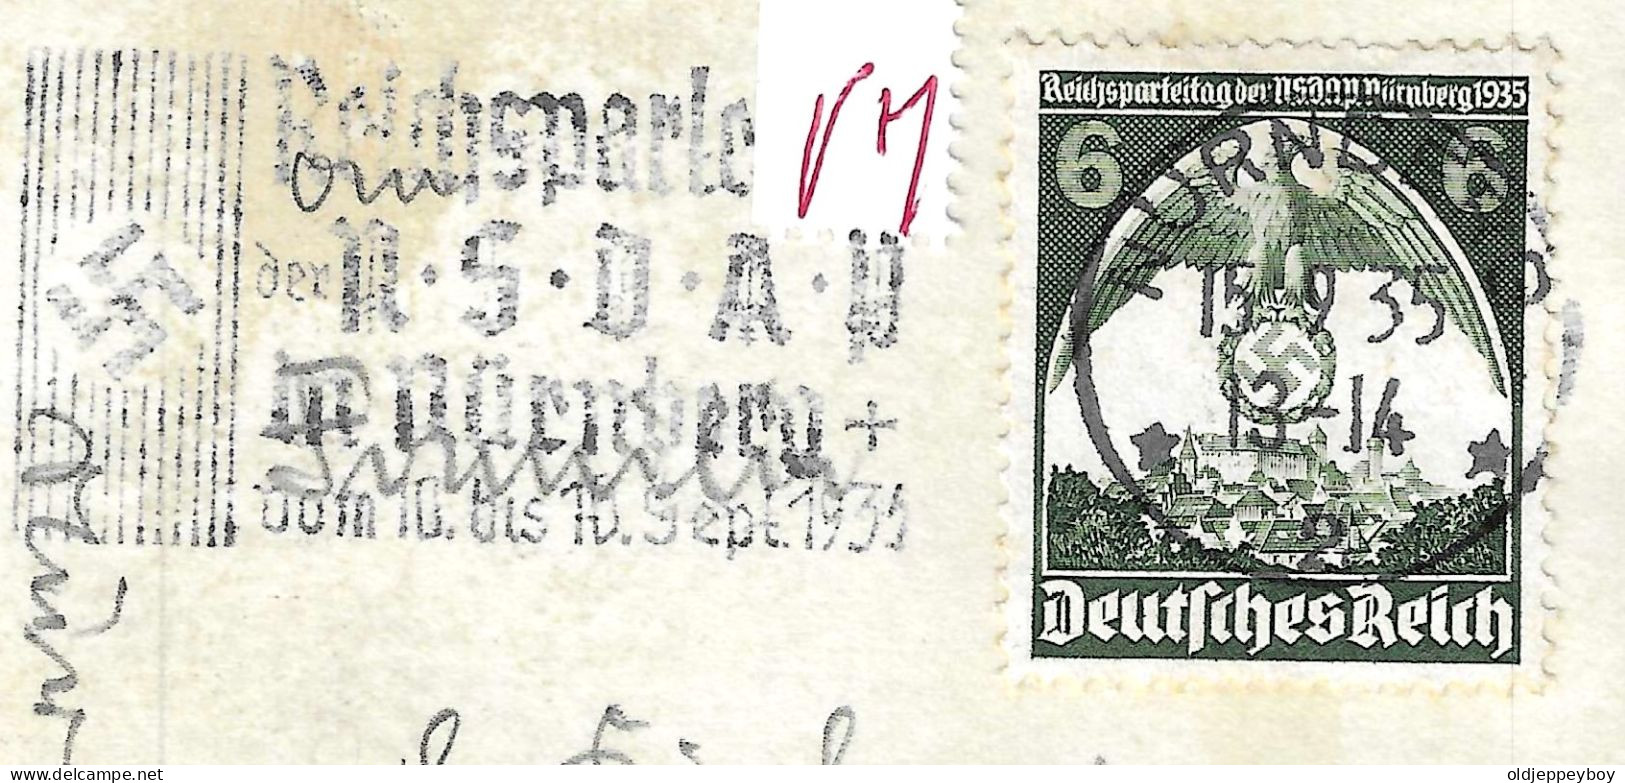 GERMANY DEUTSCHE REICH 15 SEP 1935 PRIVATE PHOTOGRAPH FROM 1934 USED AS POSTCARD AT NSDAP NAZI NÜRNBERG RALLY RARE - War 1939-45